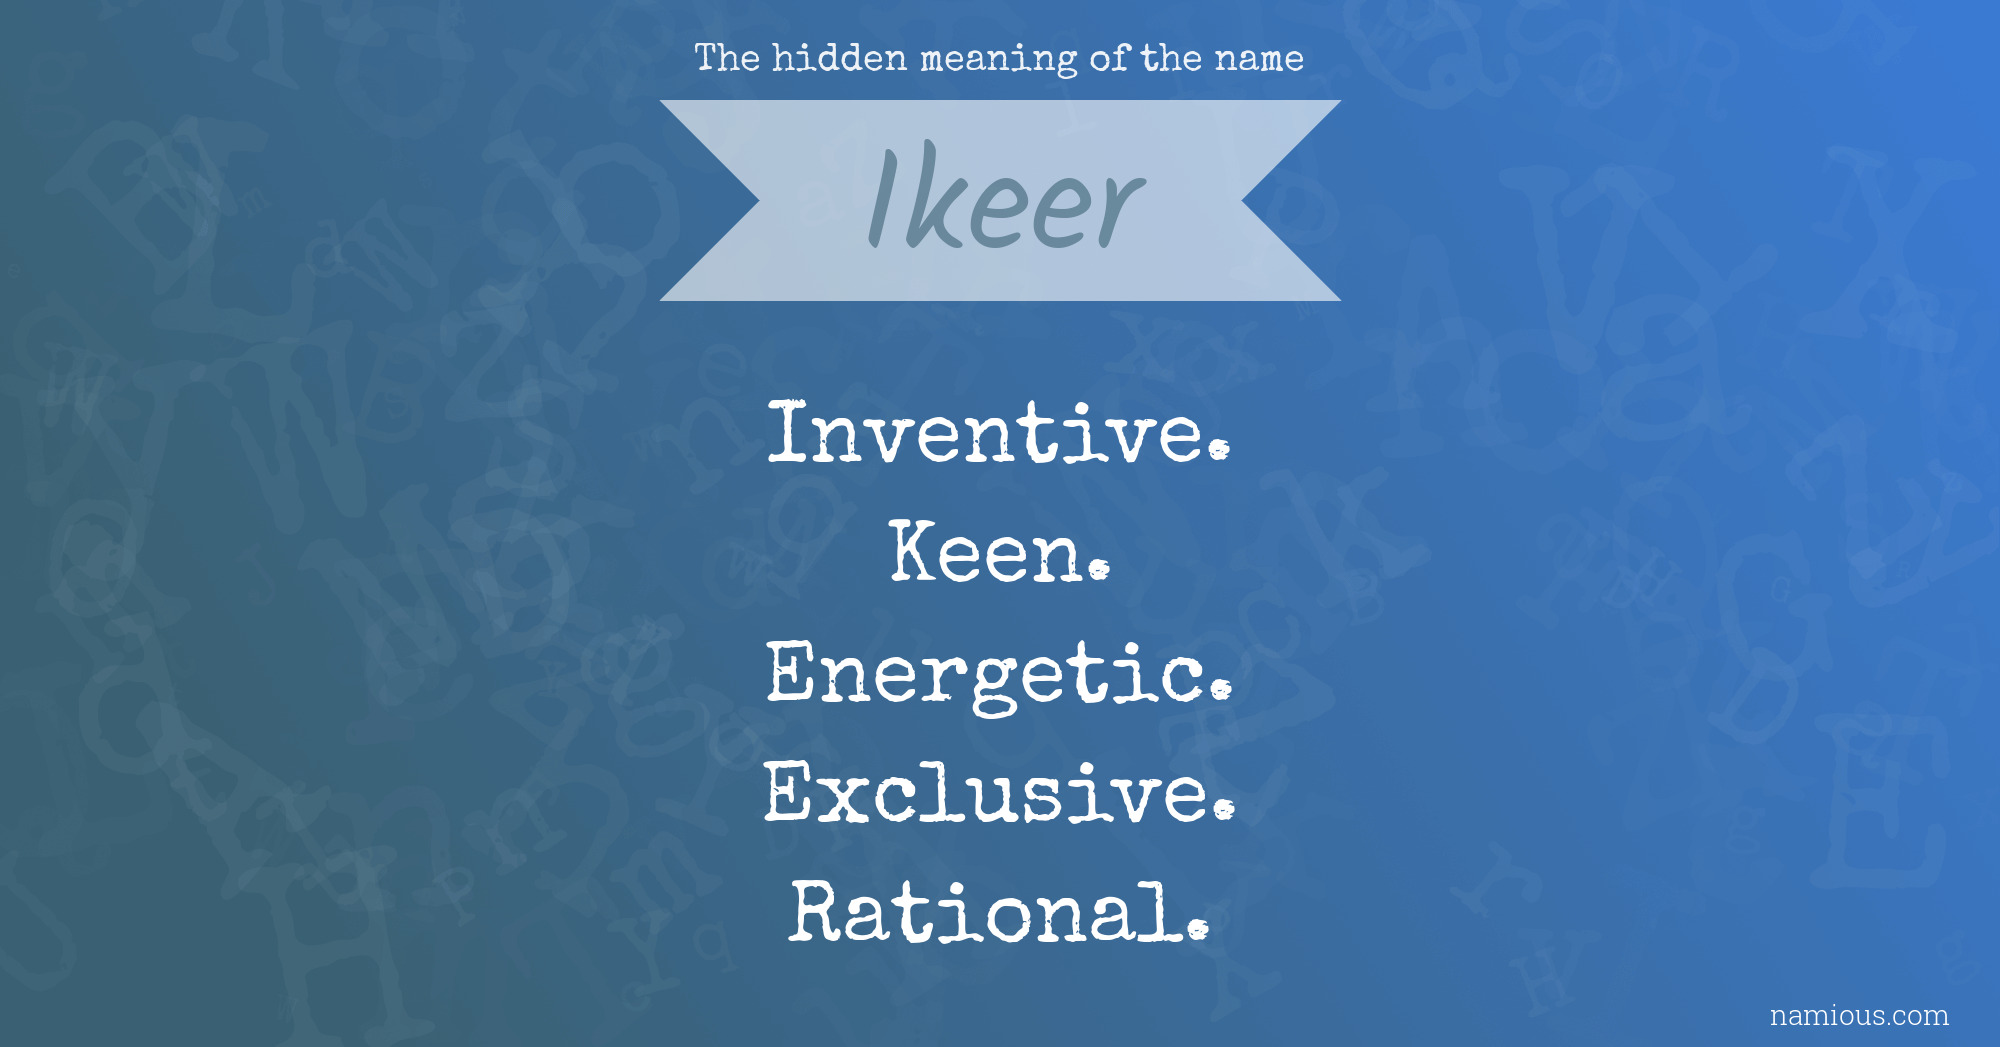 The hidden meaning of the name Ikeer